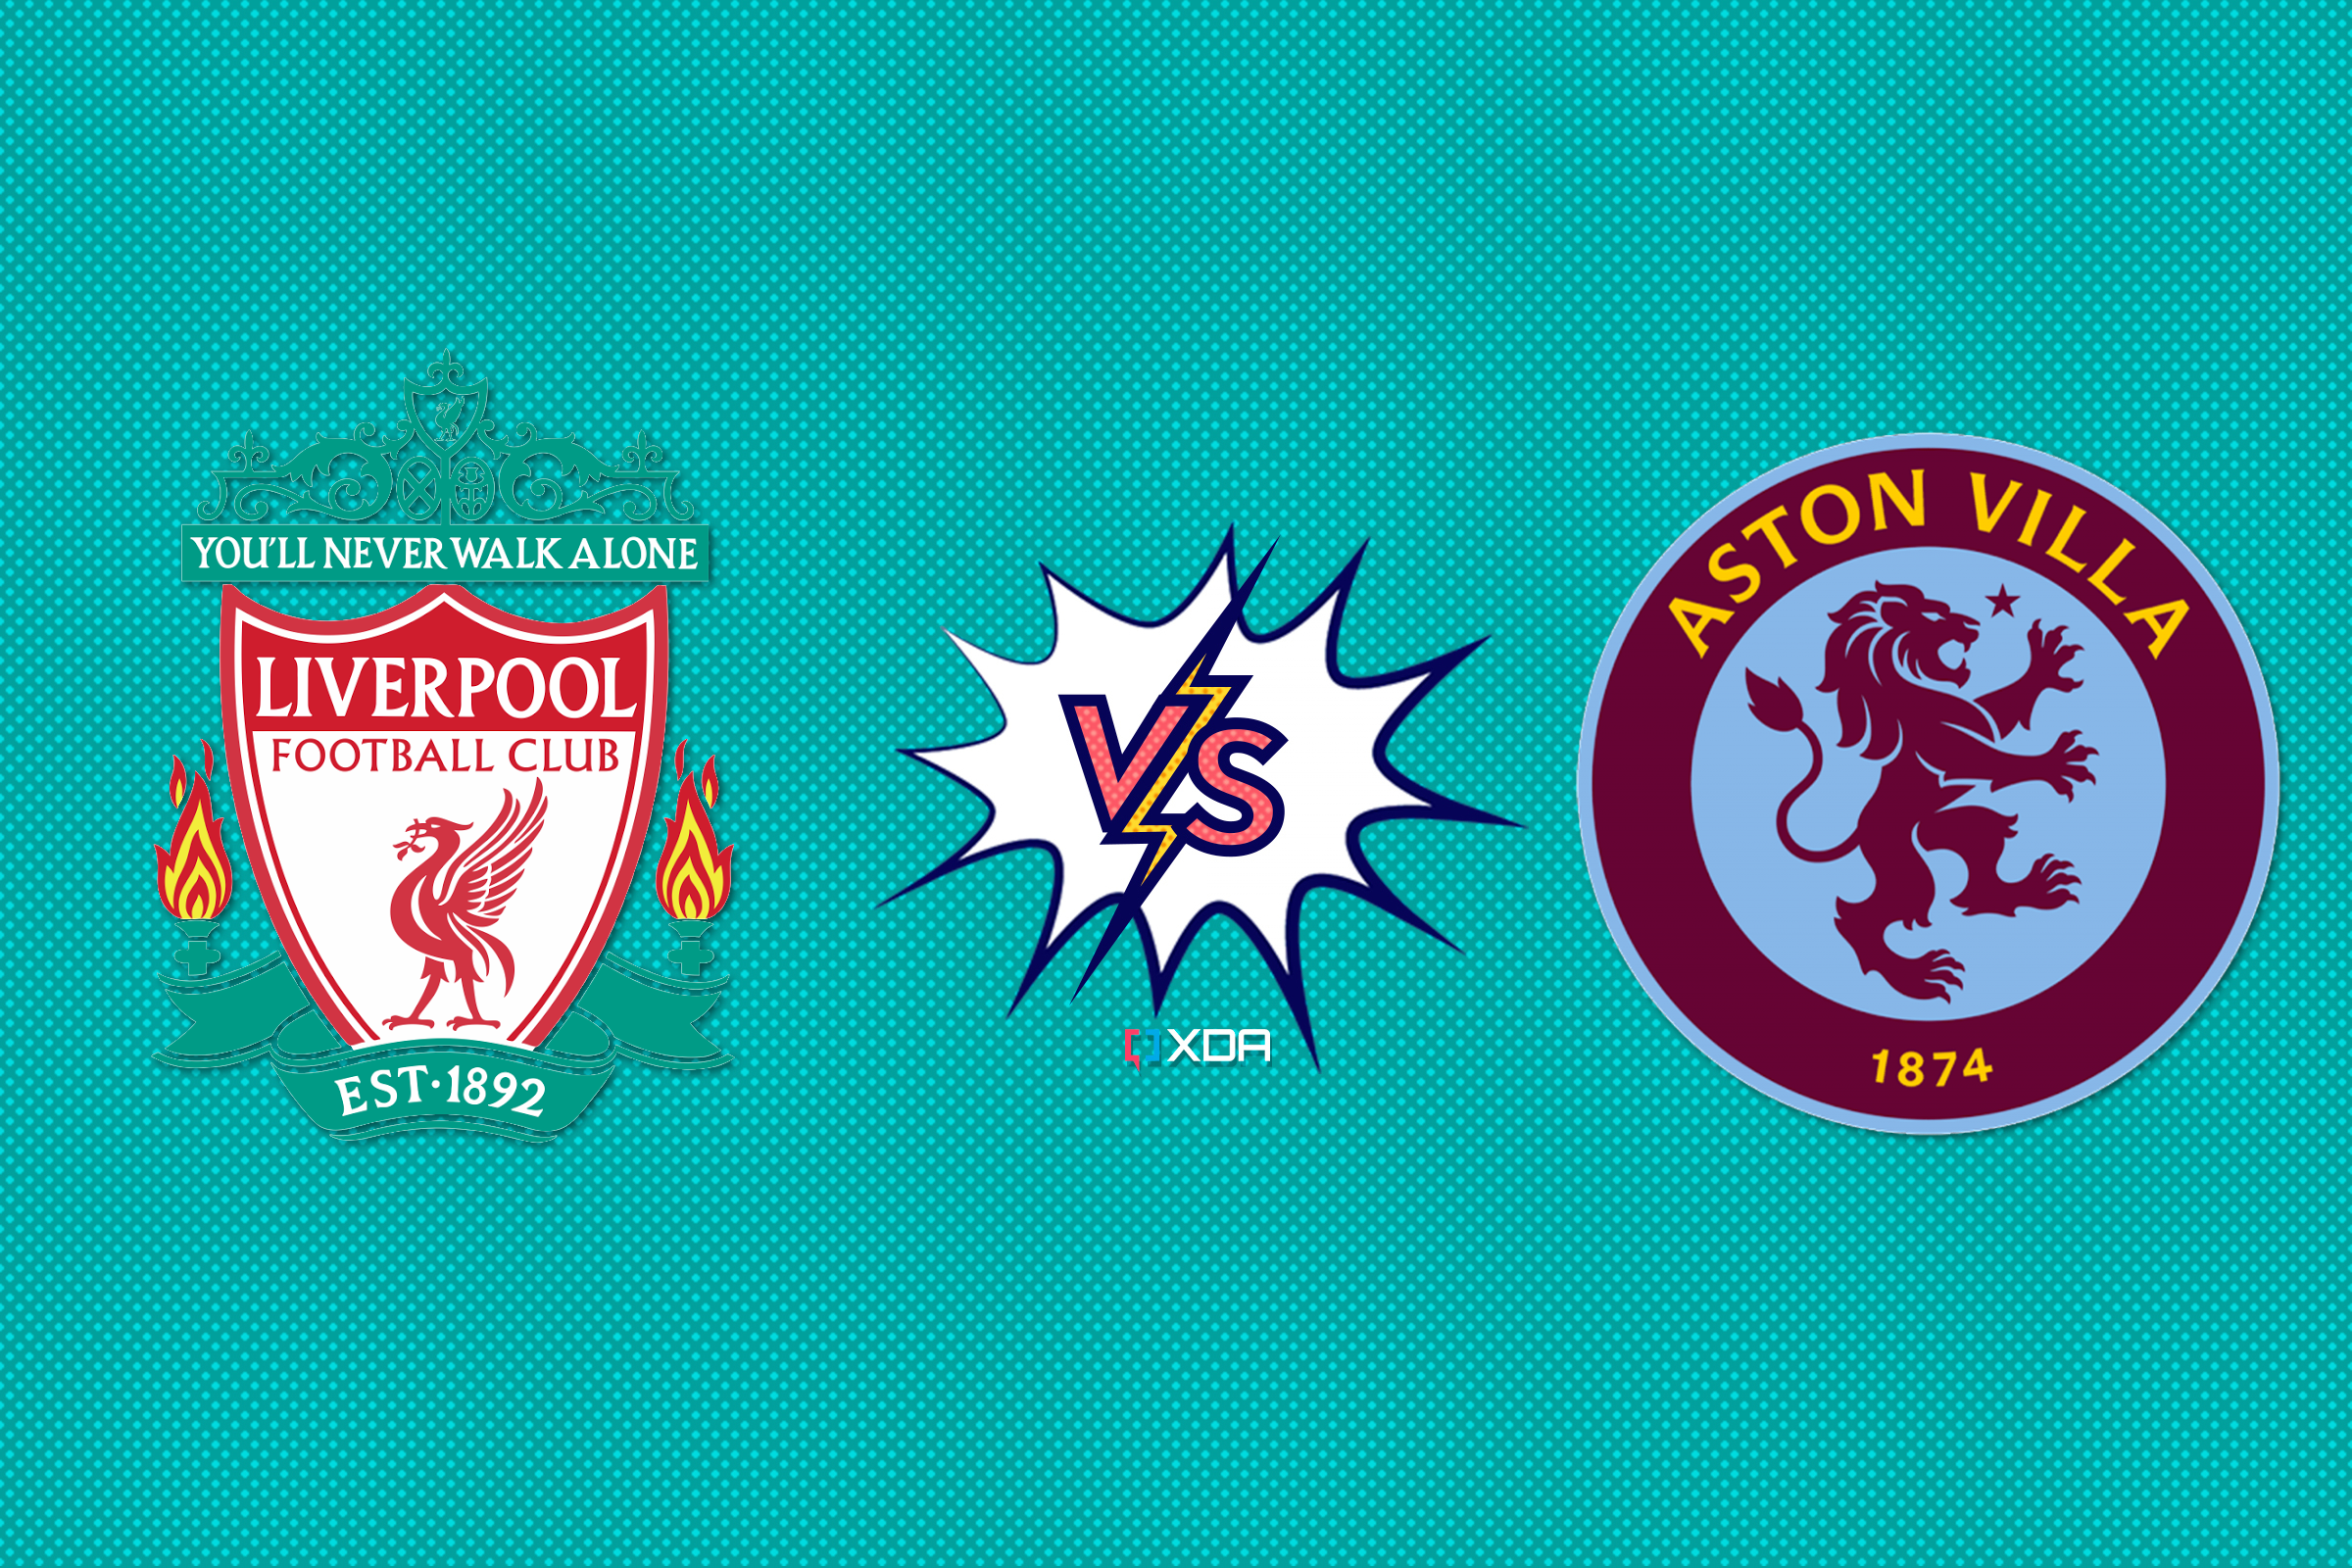 How to watch Liverpool vs Aston Villa Start time, live stream, and more